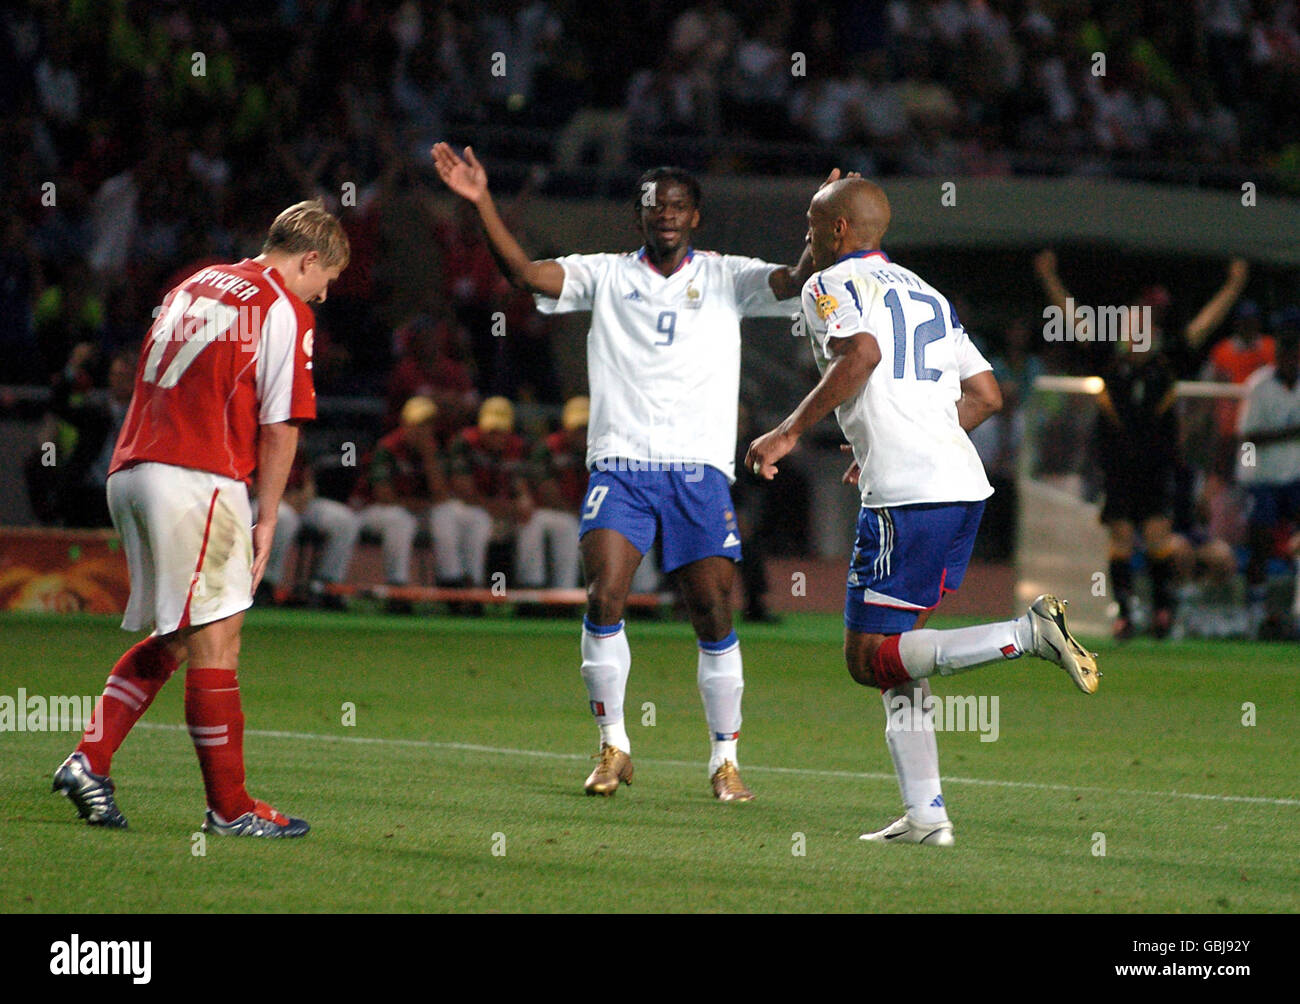 Soccer - UEFA European Championship 2004 - Group B - Switzerland v France. France's Thierry Henry celebrates scoring the third goal with teammate Louis Saha Stock Photo